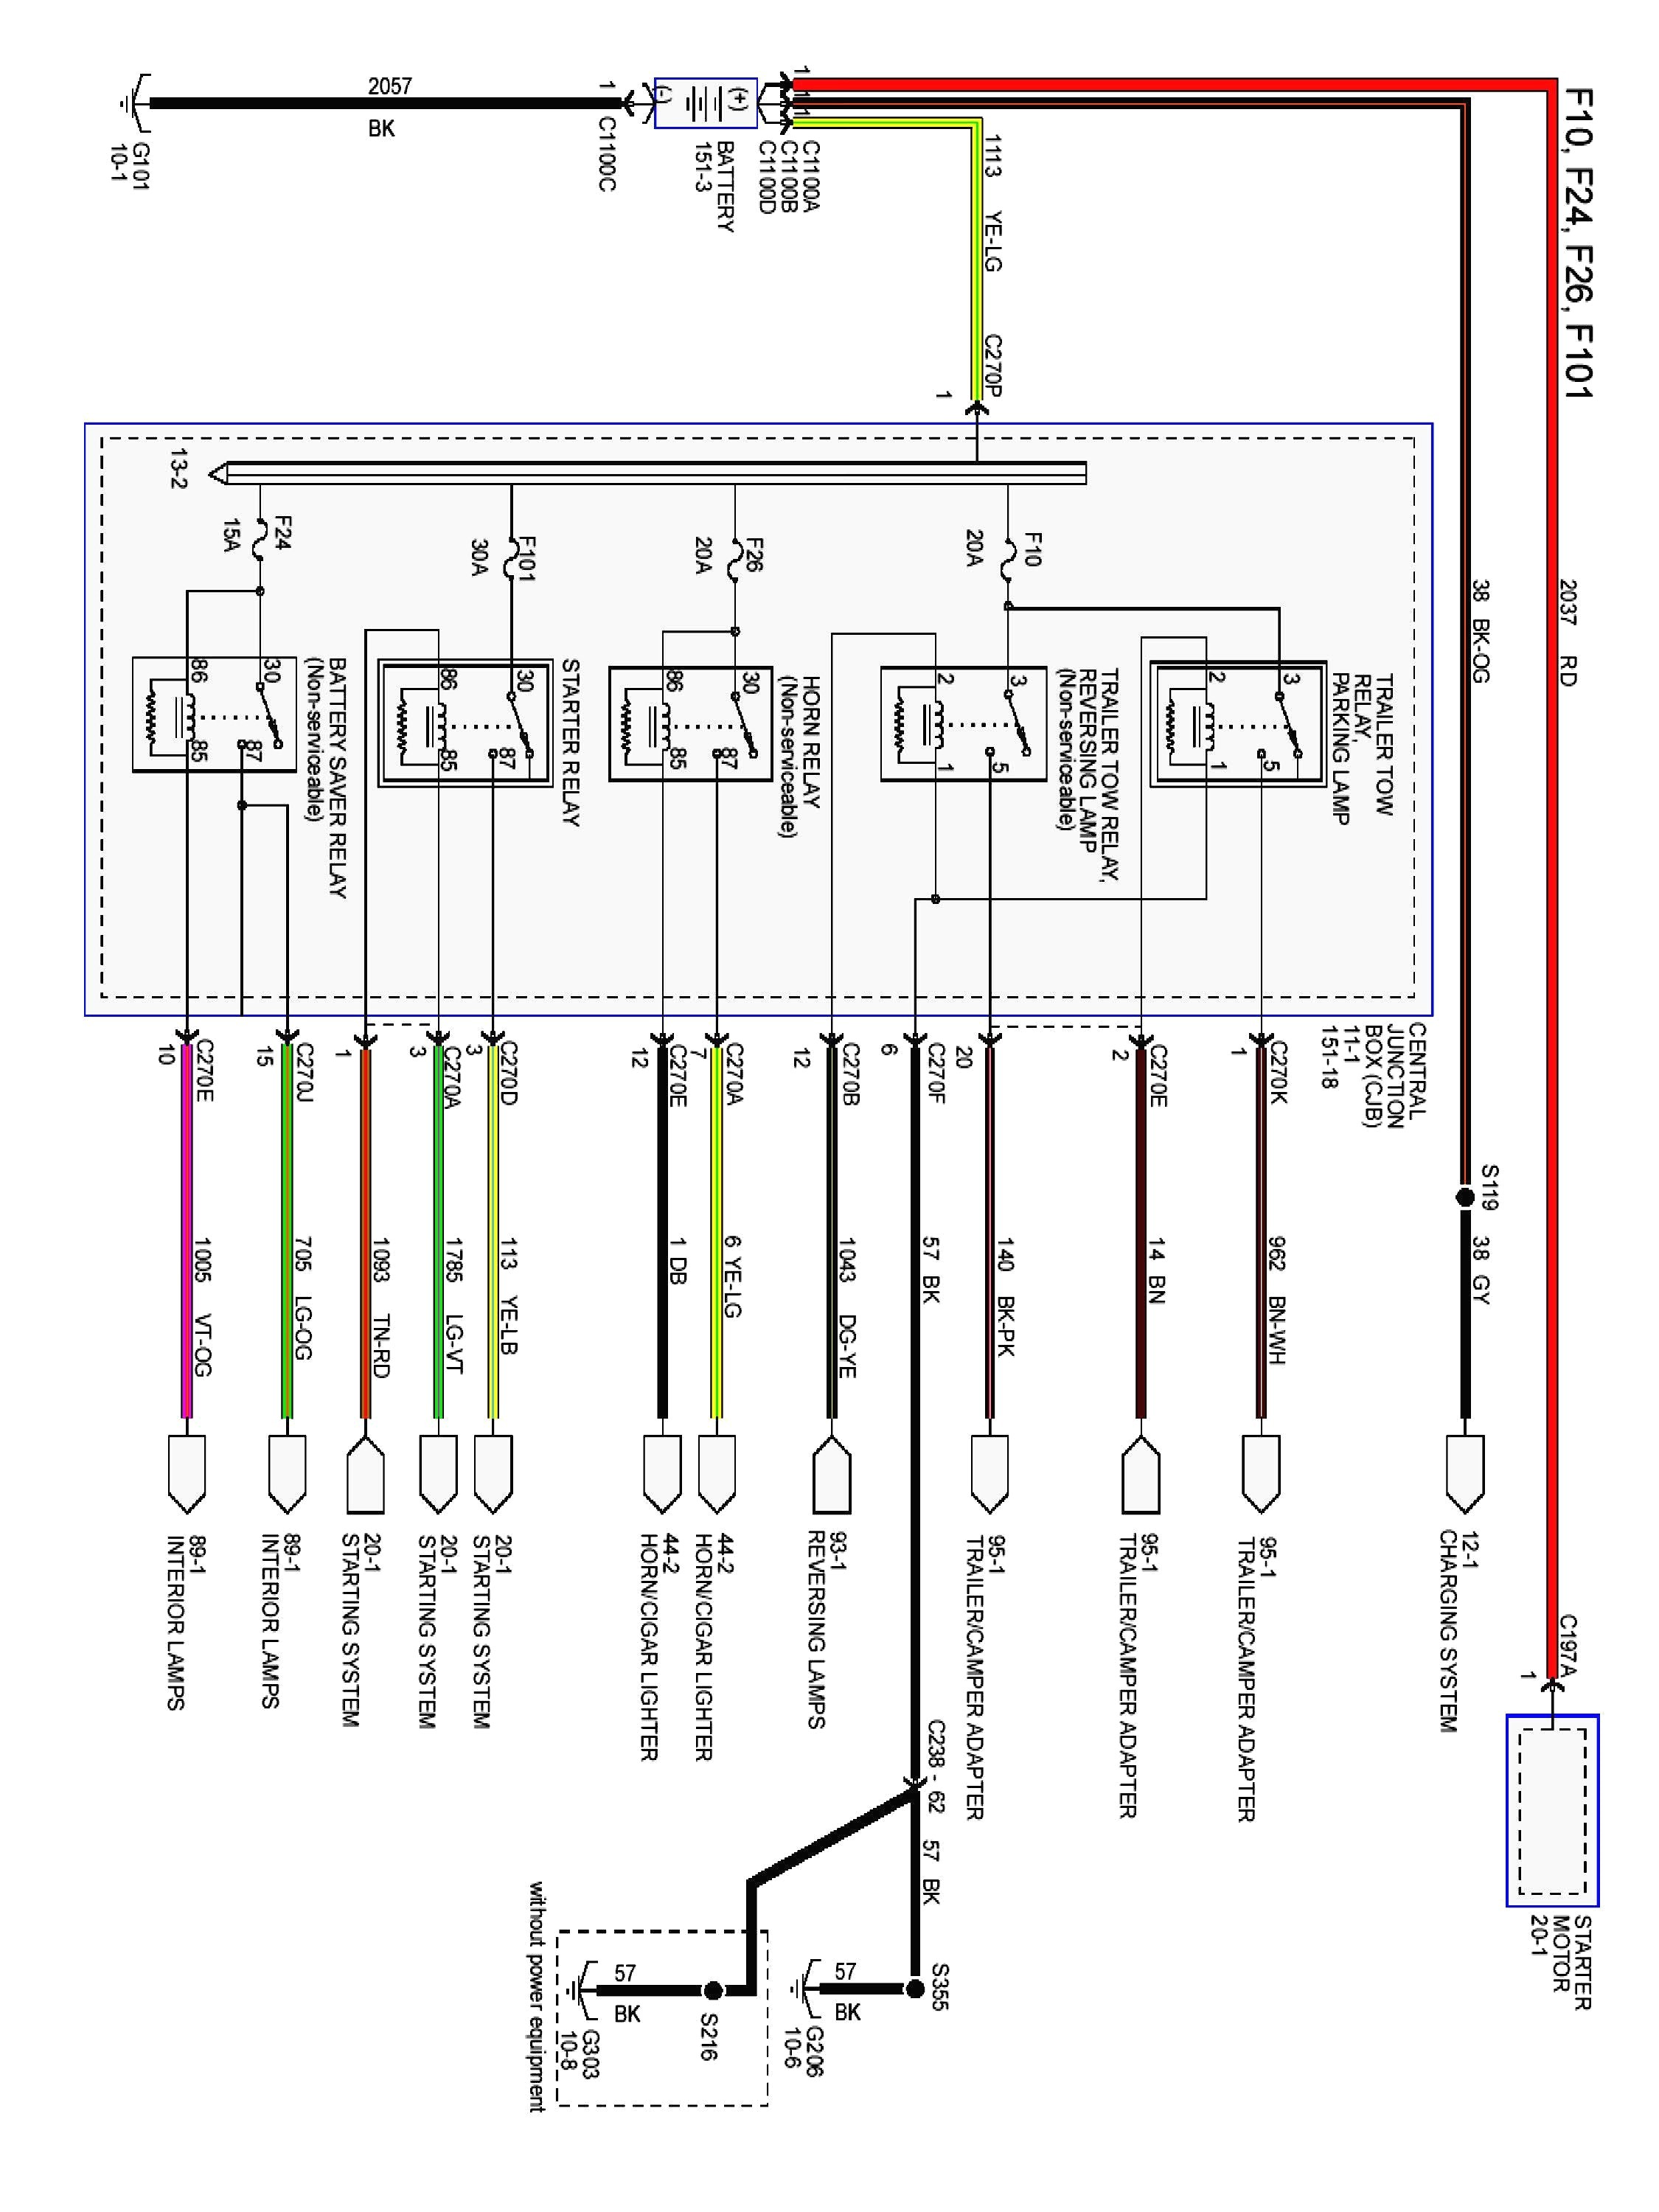 2005 Ford F 150 4 Pin Wiring Diagram Wiring Diagram 2005 Ford F 150 Charging System Wiring Diagram 2005 Ford F 150 Wiring Diagram